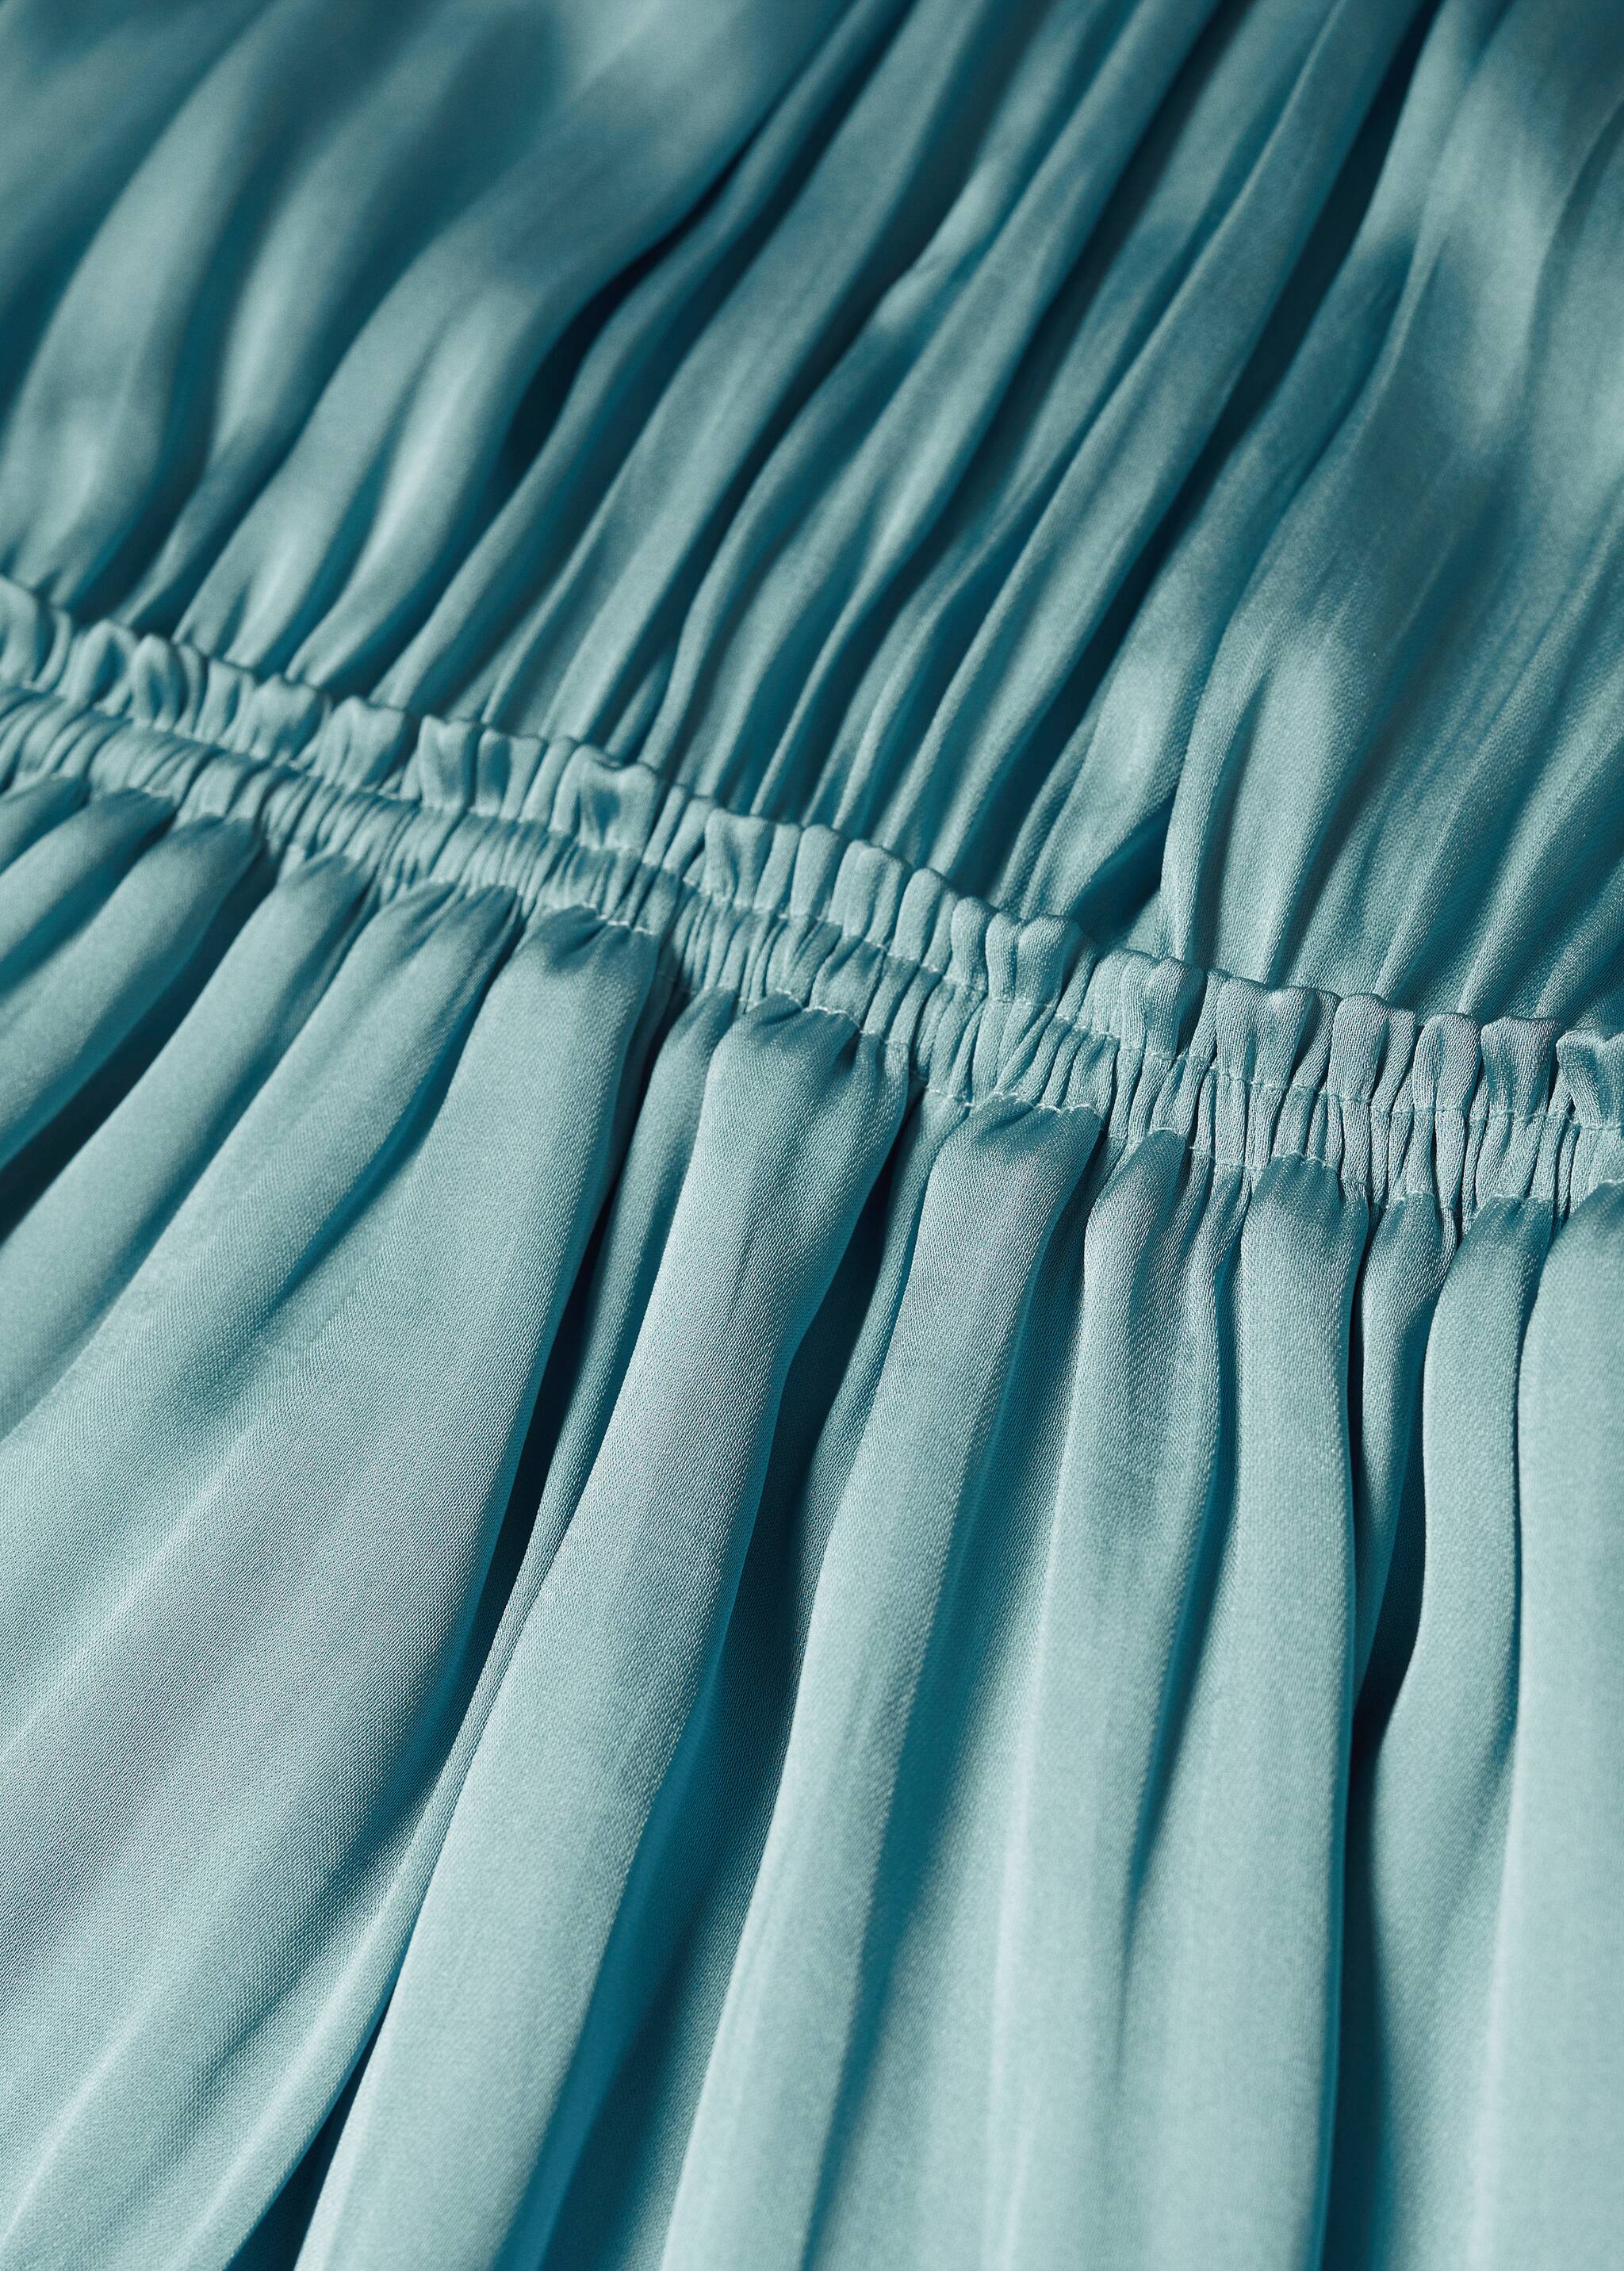 Ruffle satin dress - Details of the article 8